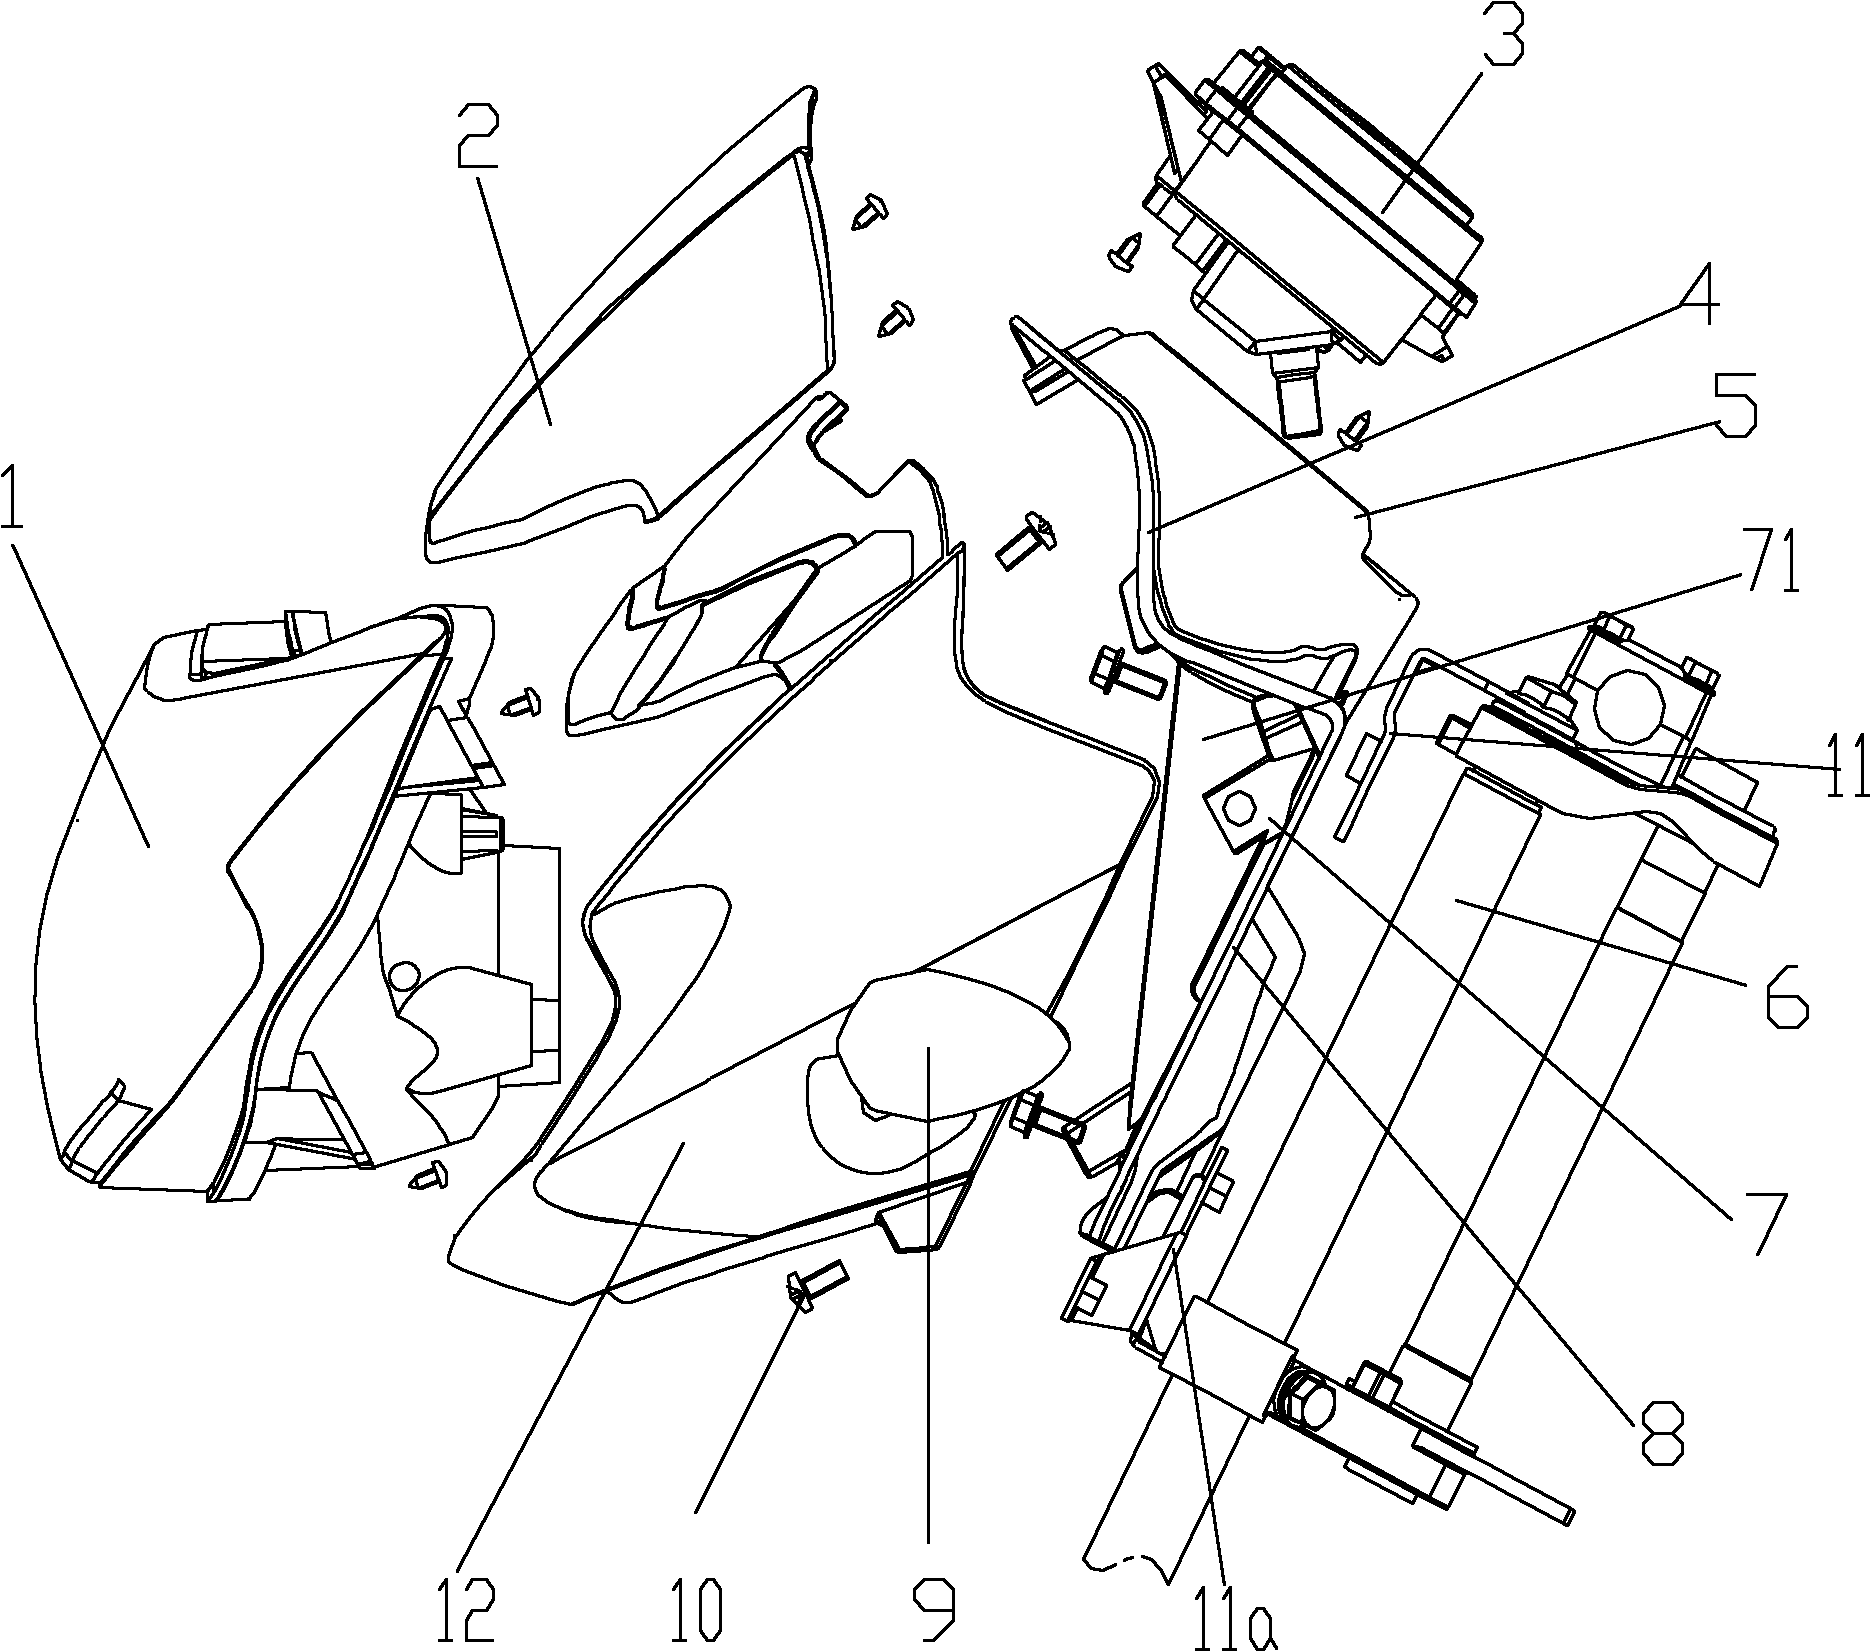 Motorcycle and front fairing assembly thereof